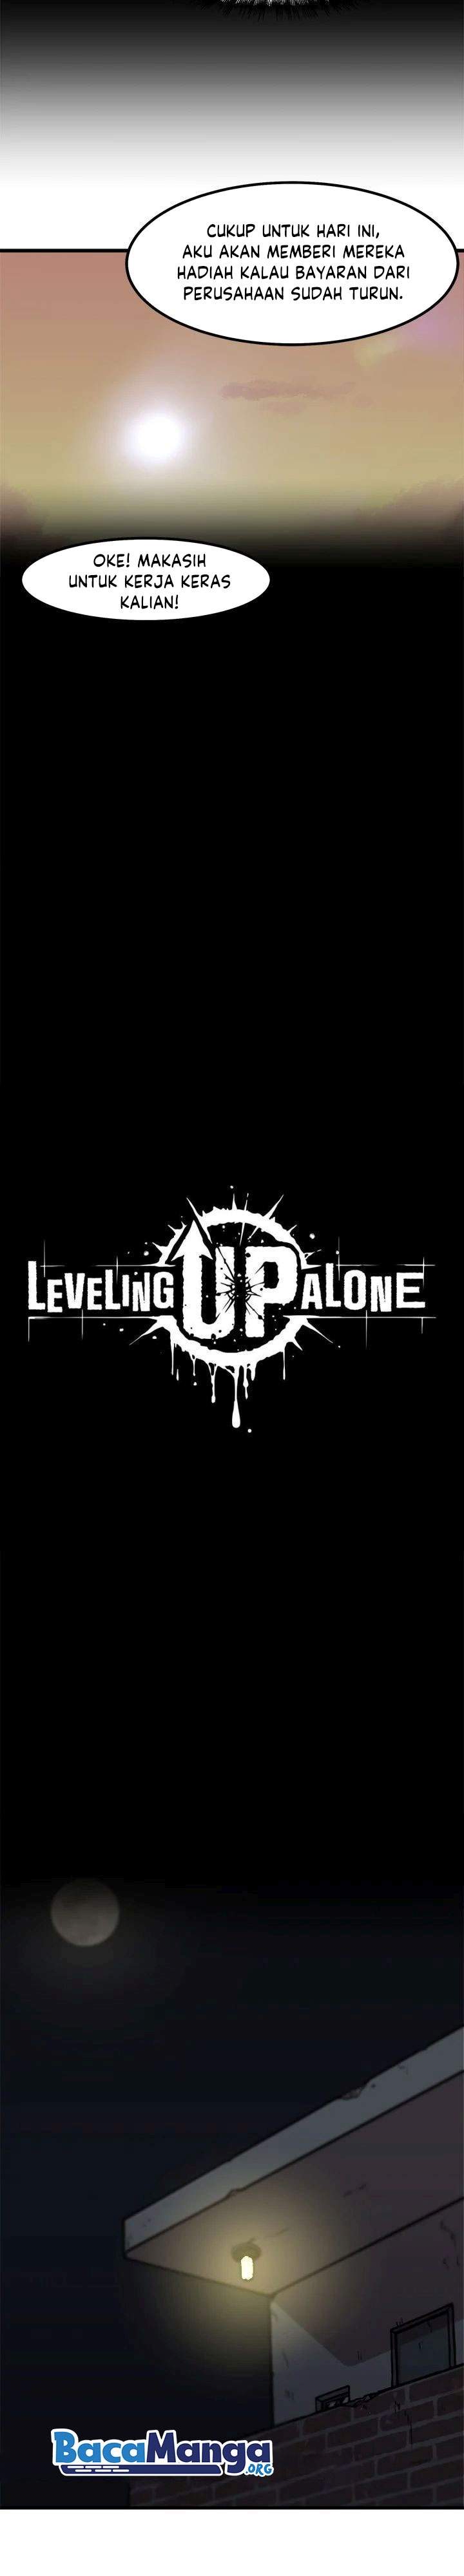 Bring My Level Up Alone Chapter 46